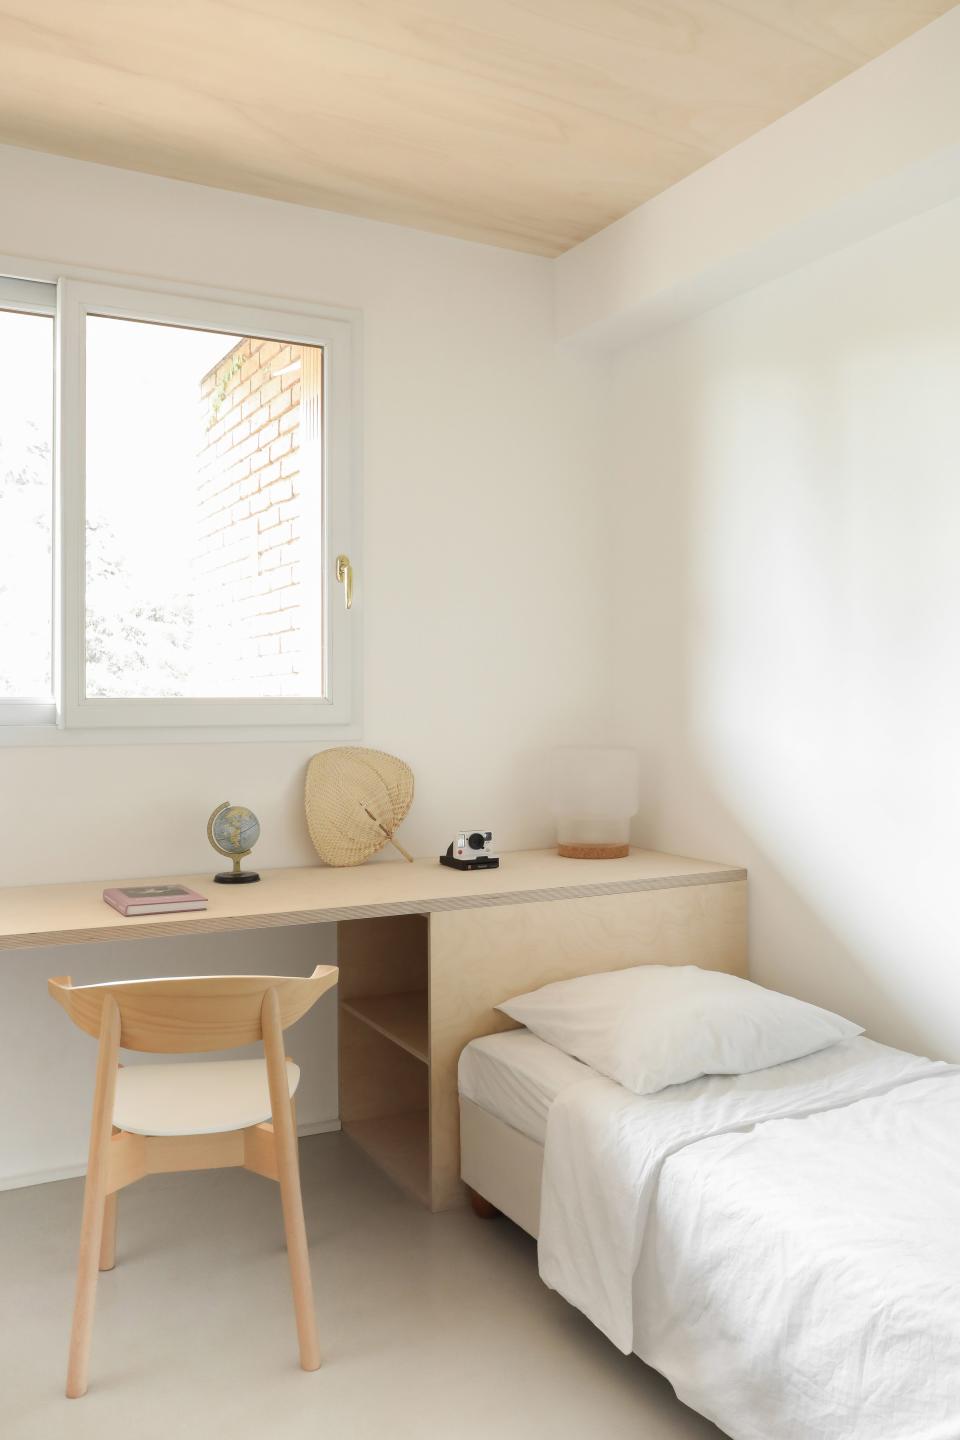 With its made-to-measure desk and bed frame, the kid’s room was inspired by nature and the work of Alvar Aalto.